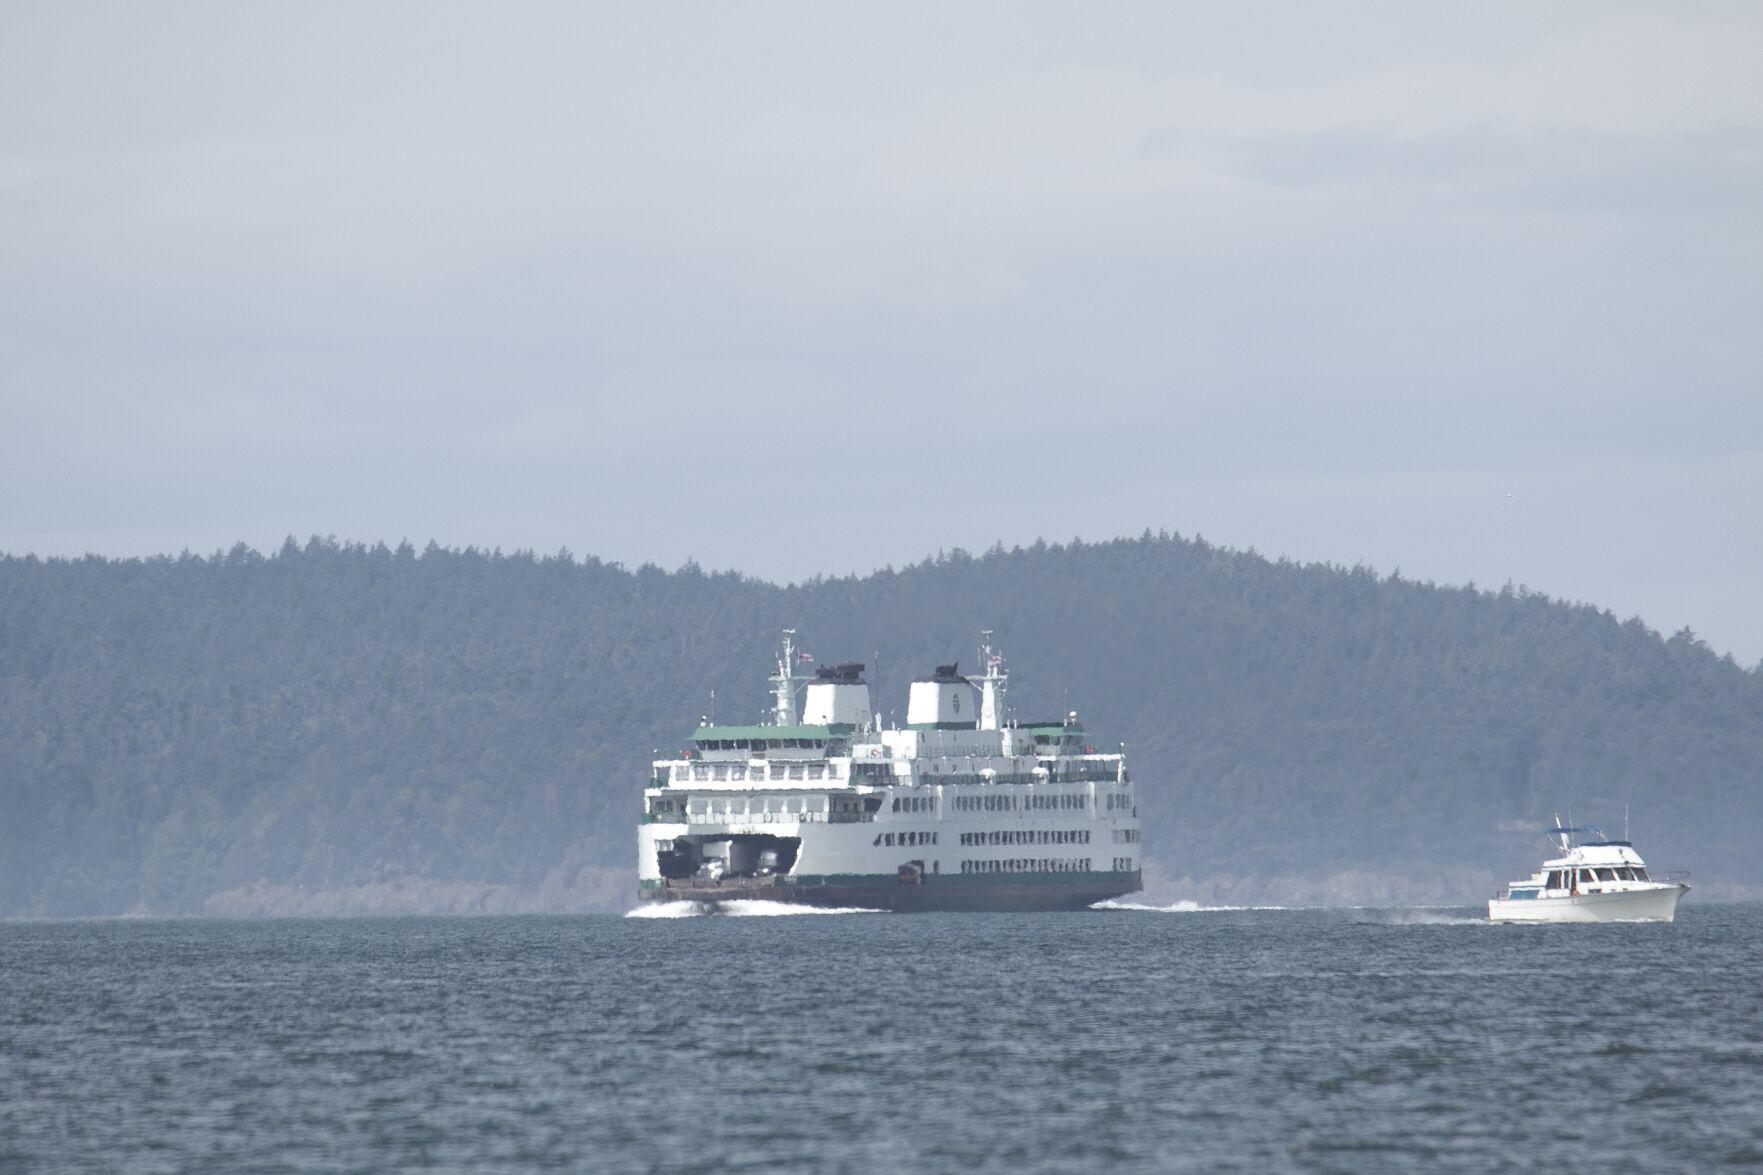 Ferry route from Anacortes to Sidney, B.C., on hold until at least 2023